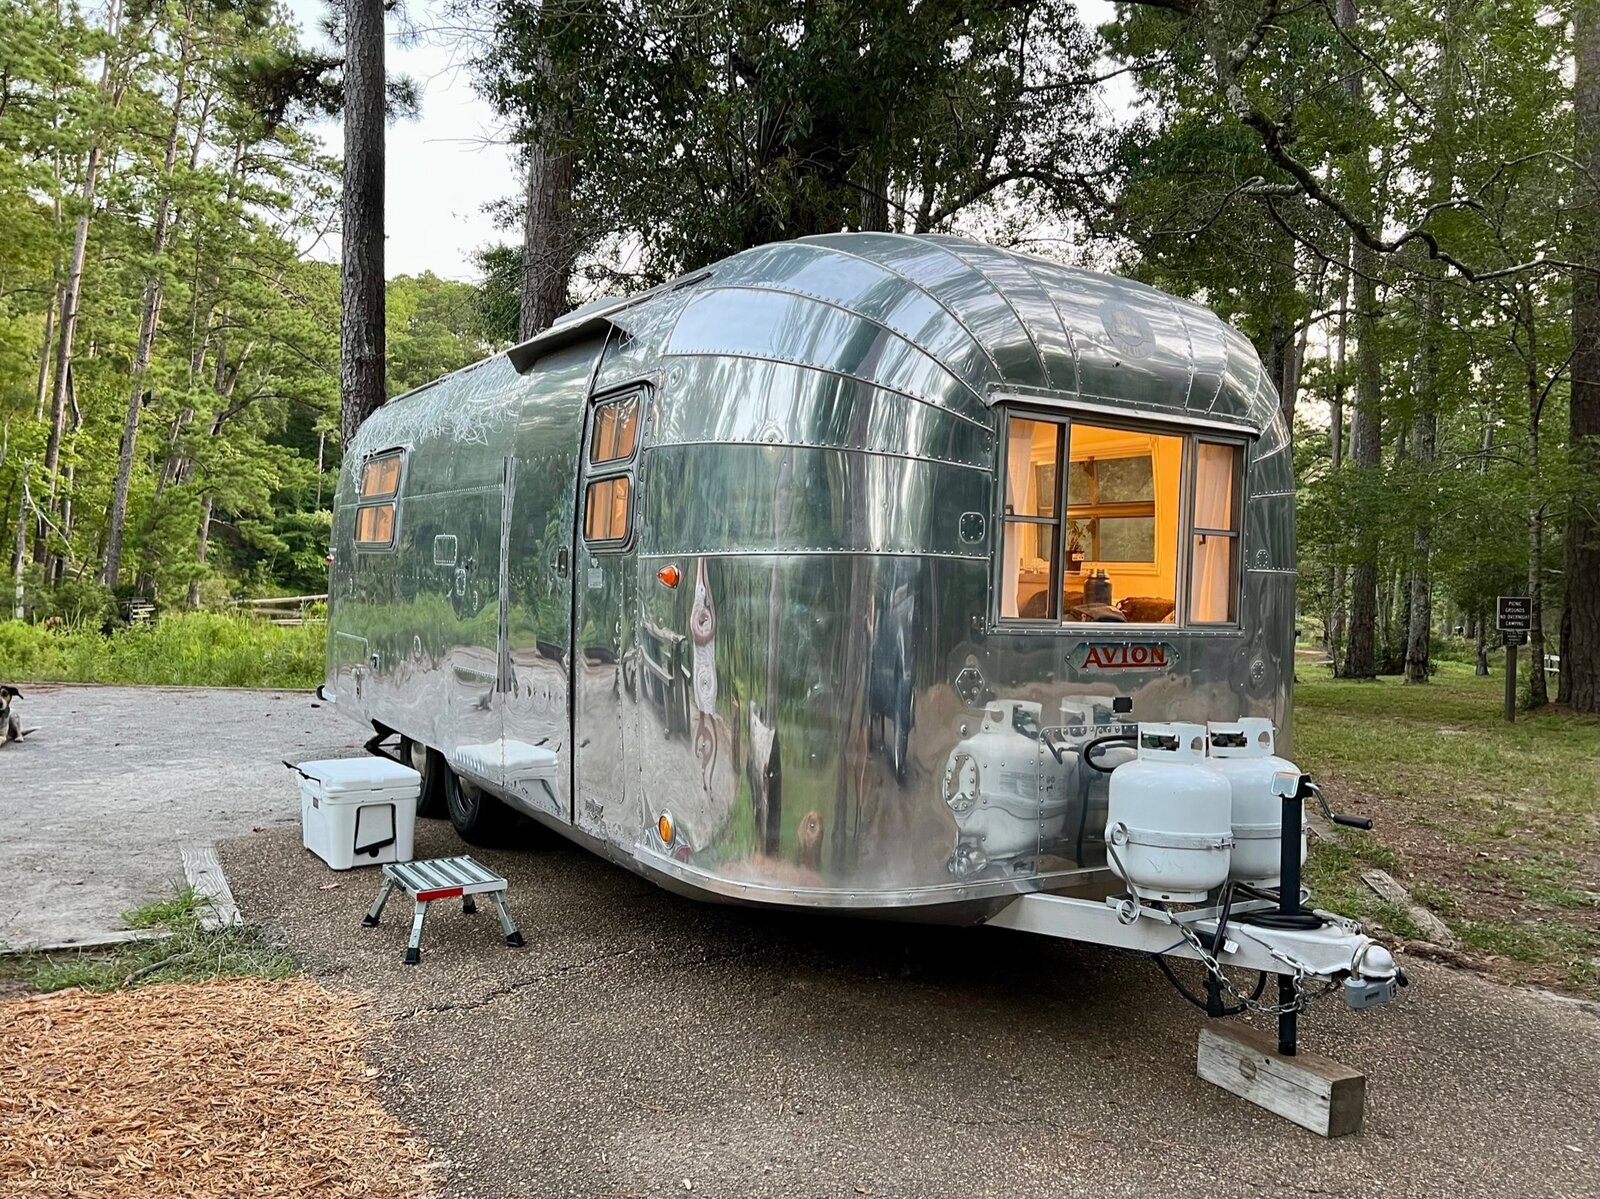 After a Full Overhaul, This Vintage Avion Camper Is Ready to Hit the Road for $85K